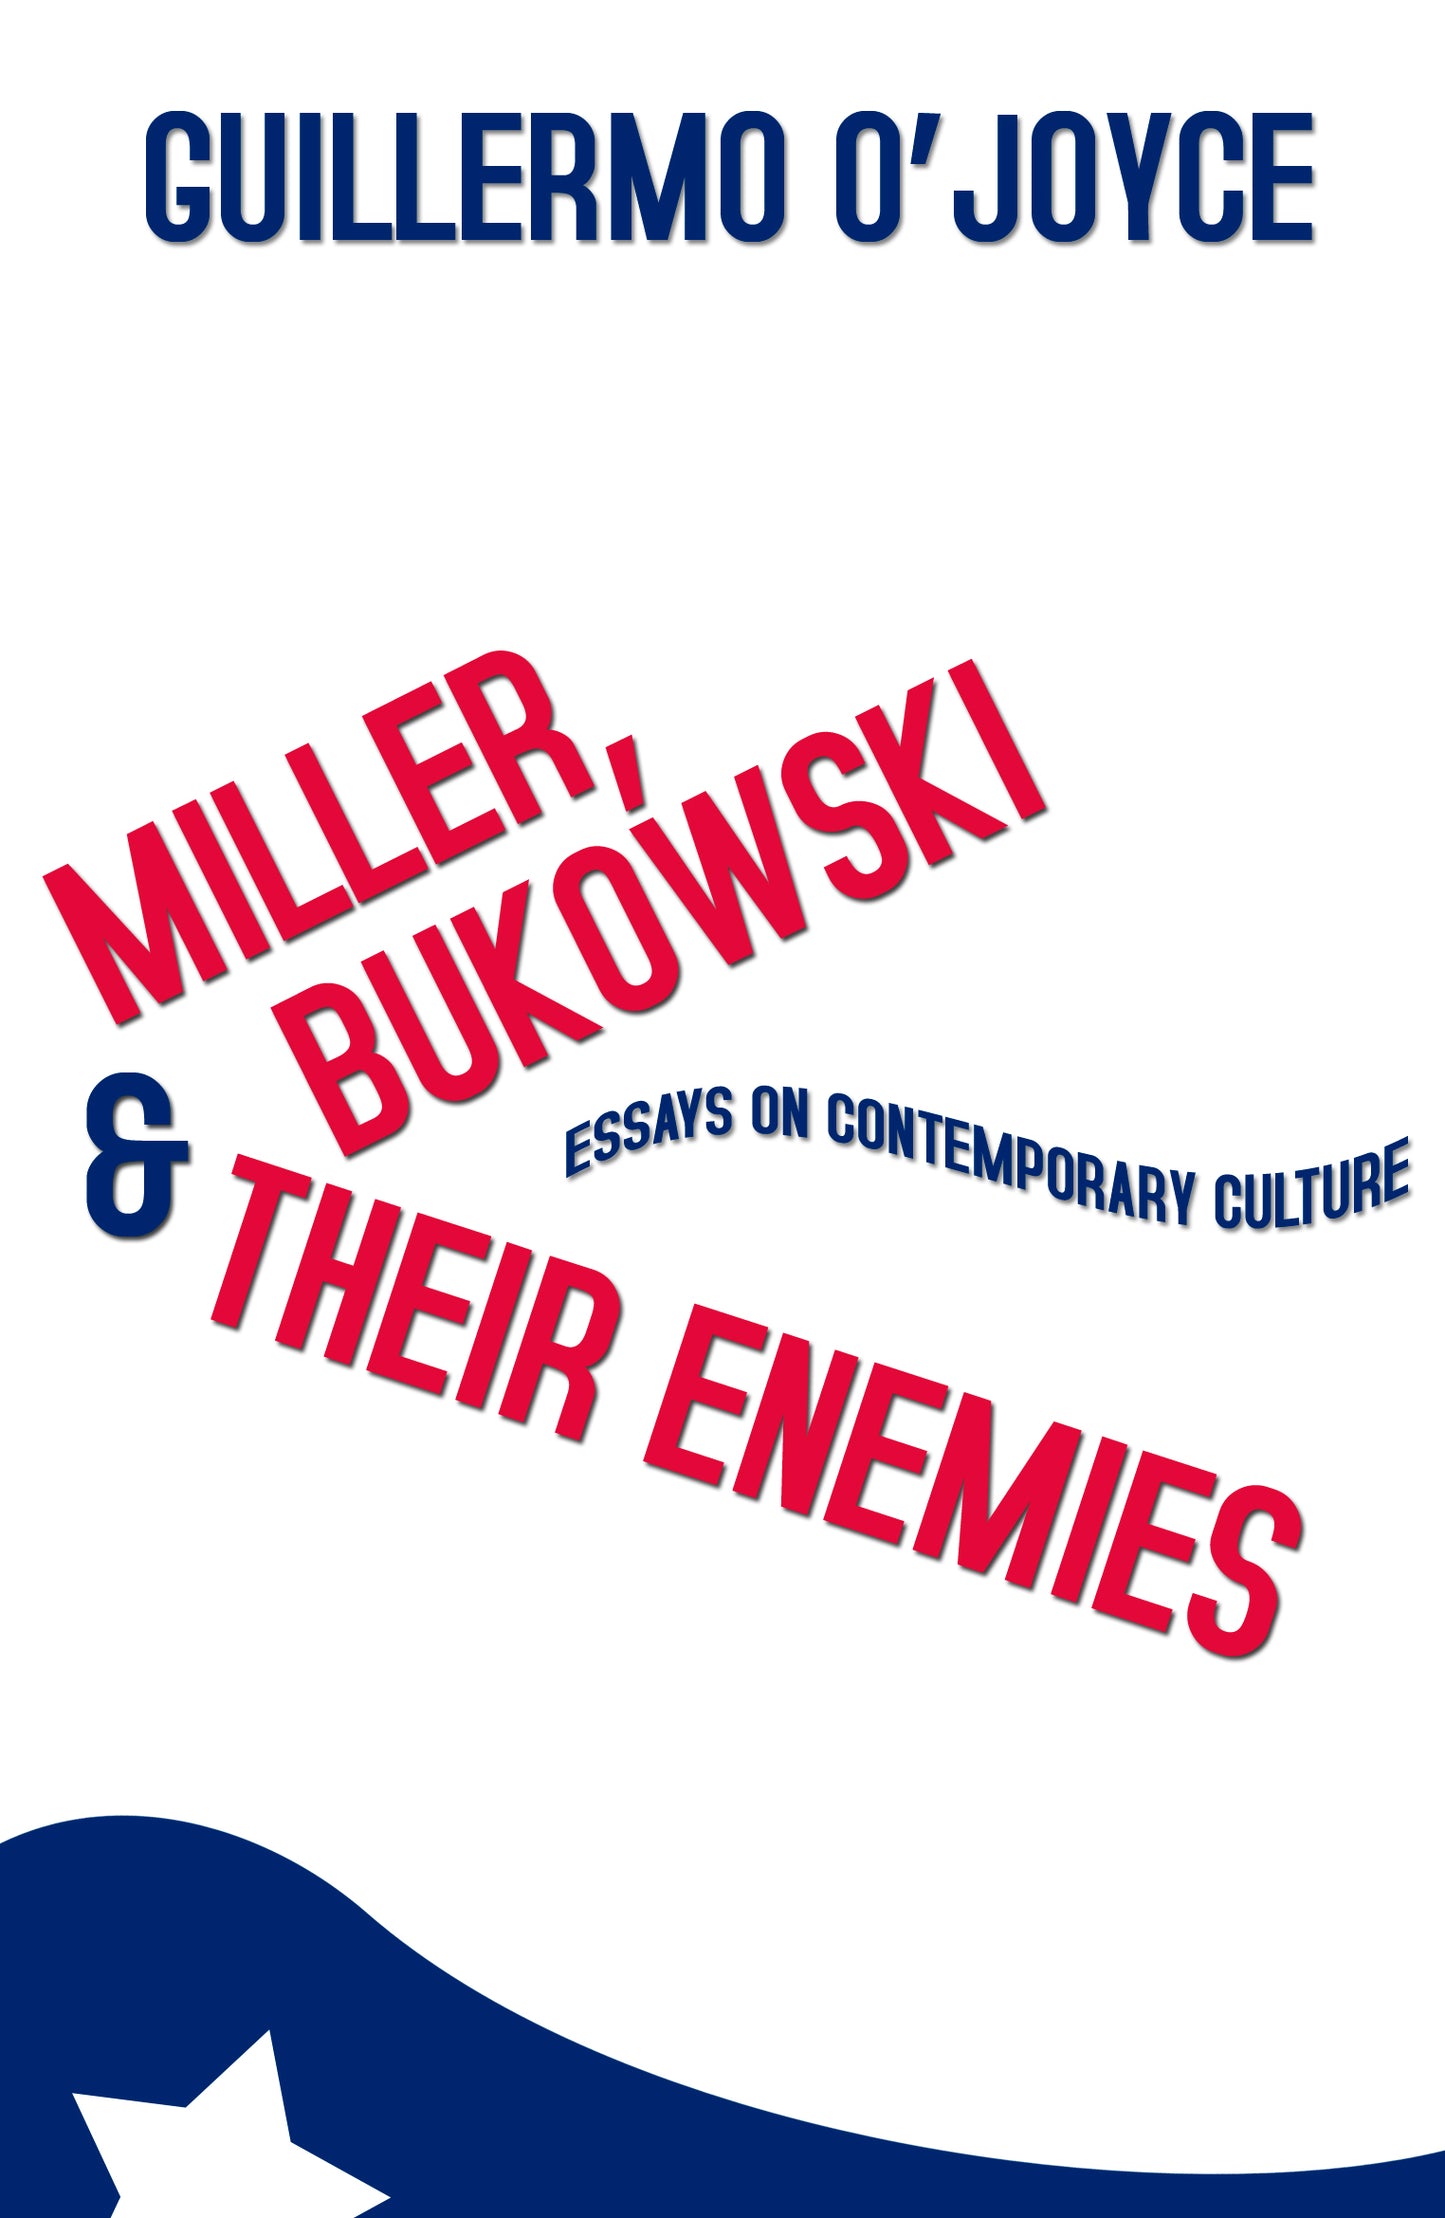 Miller, Bukowski and Their Enemies: Essays on Contemporary Culture